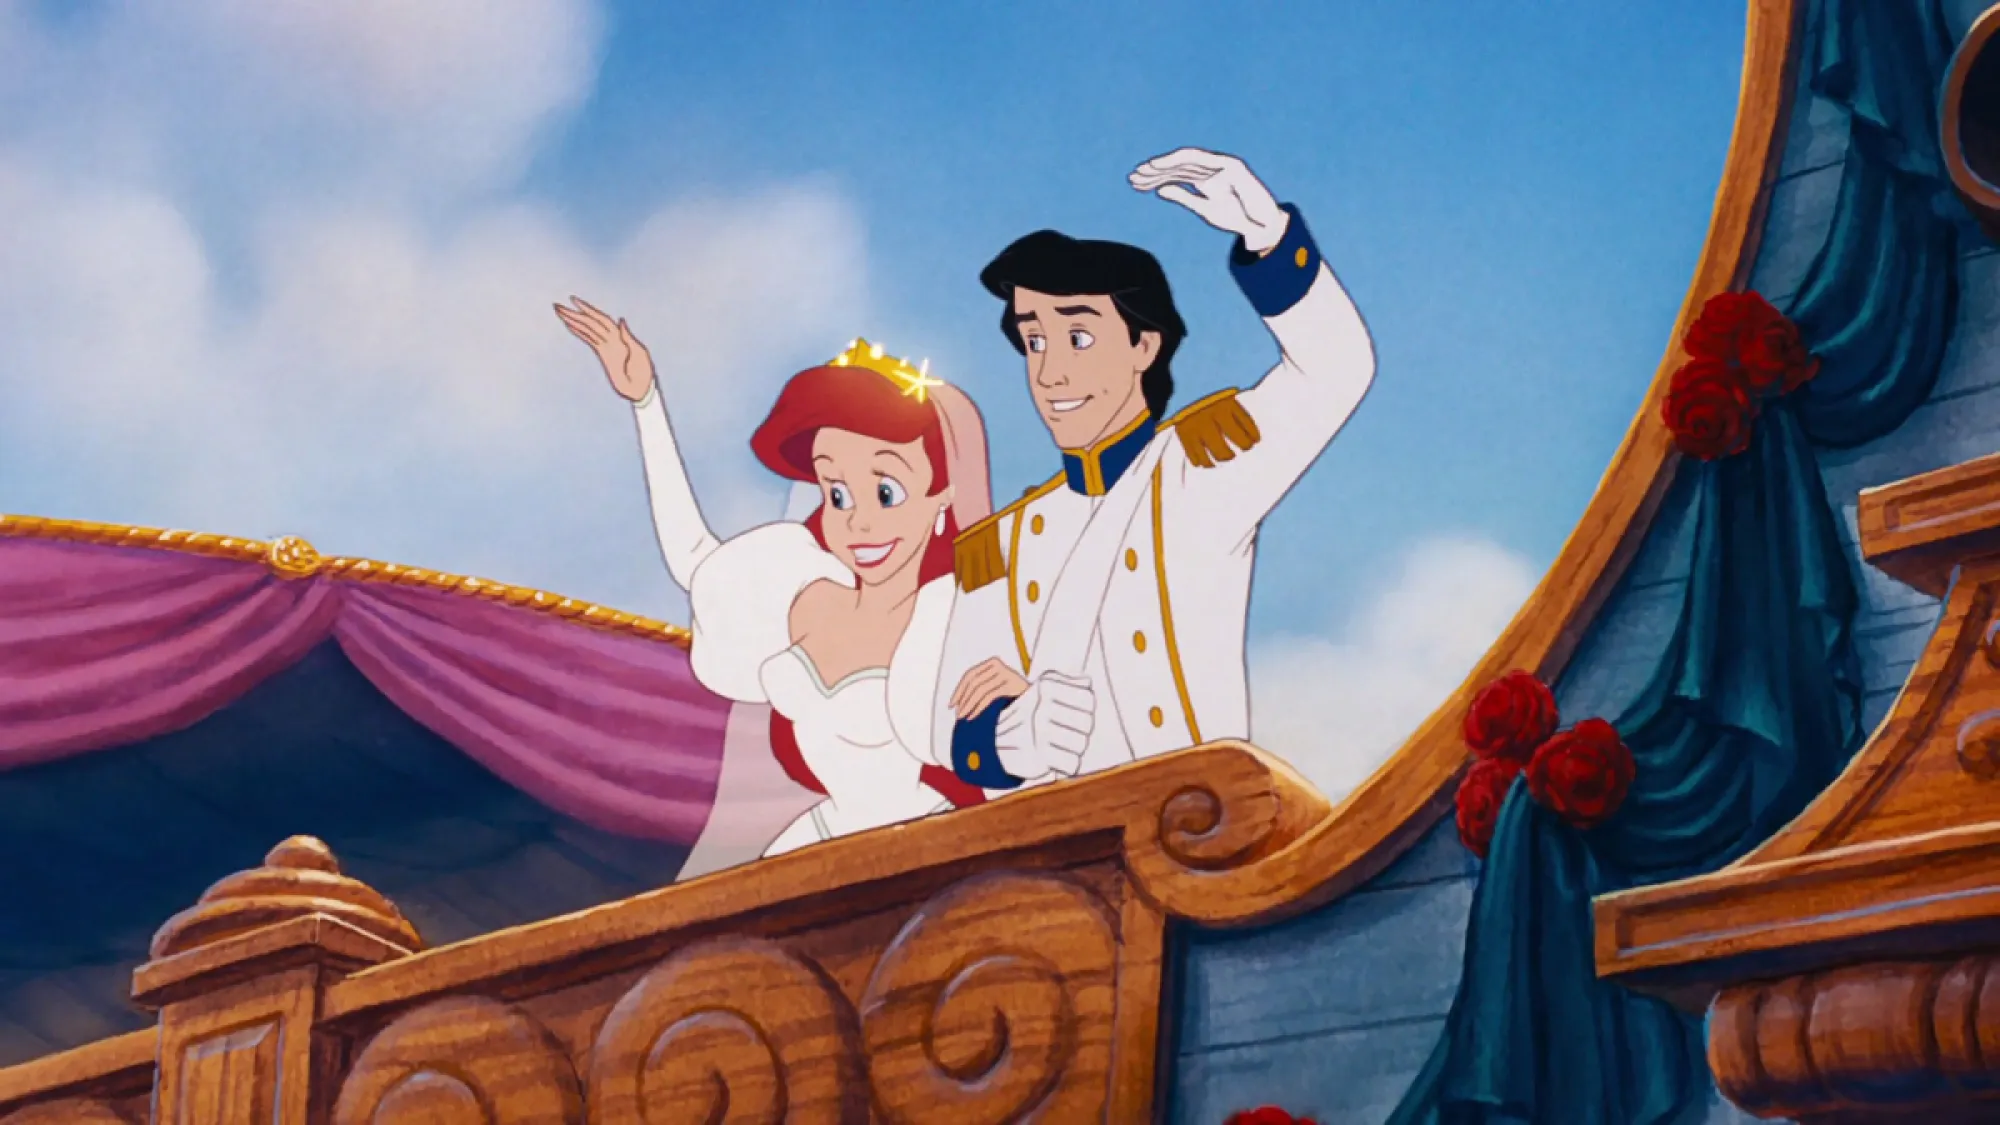 Ariel and Prince Eric wave on their wedding day in 'The Little Mermaid'